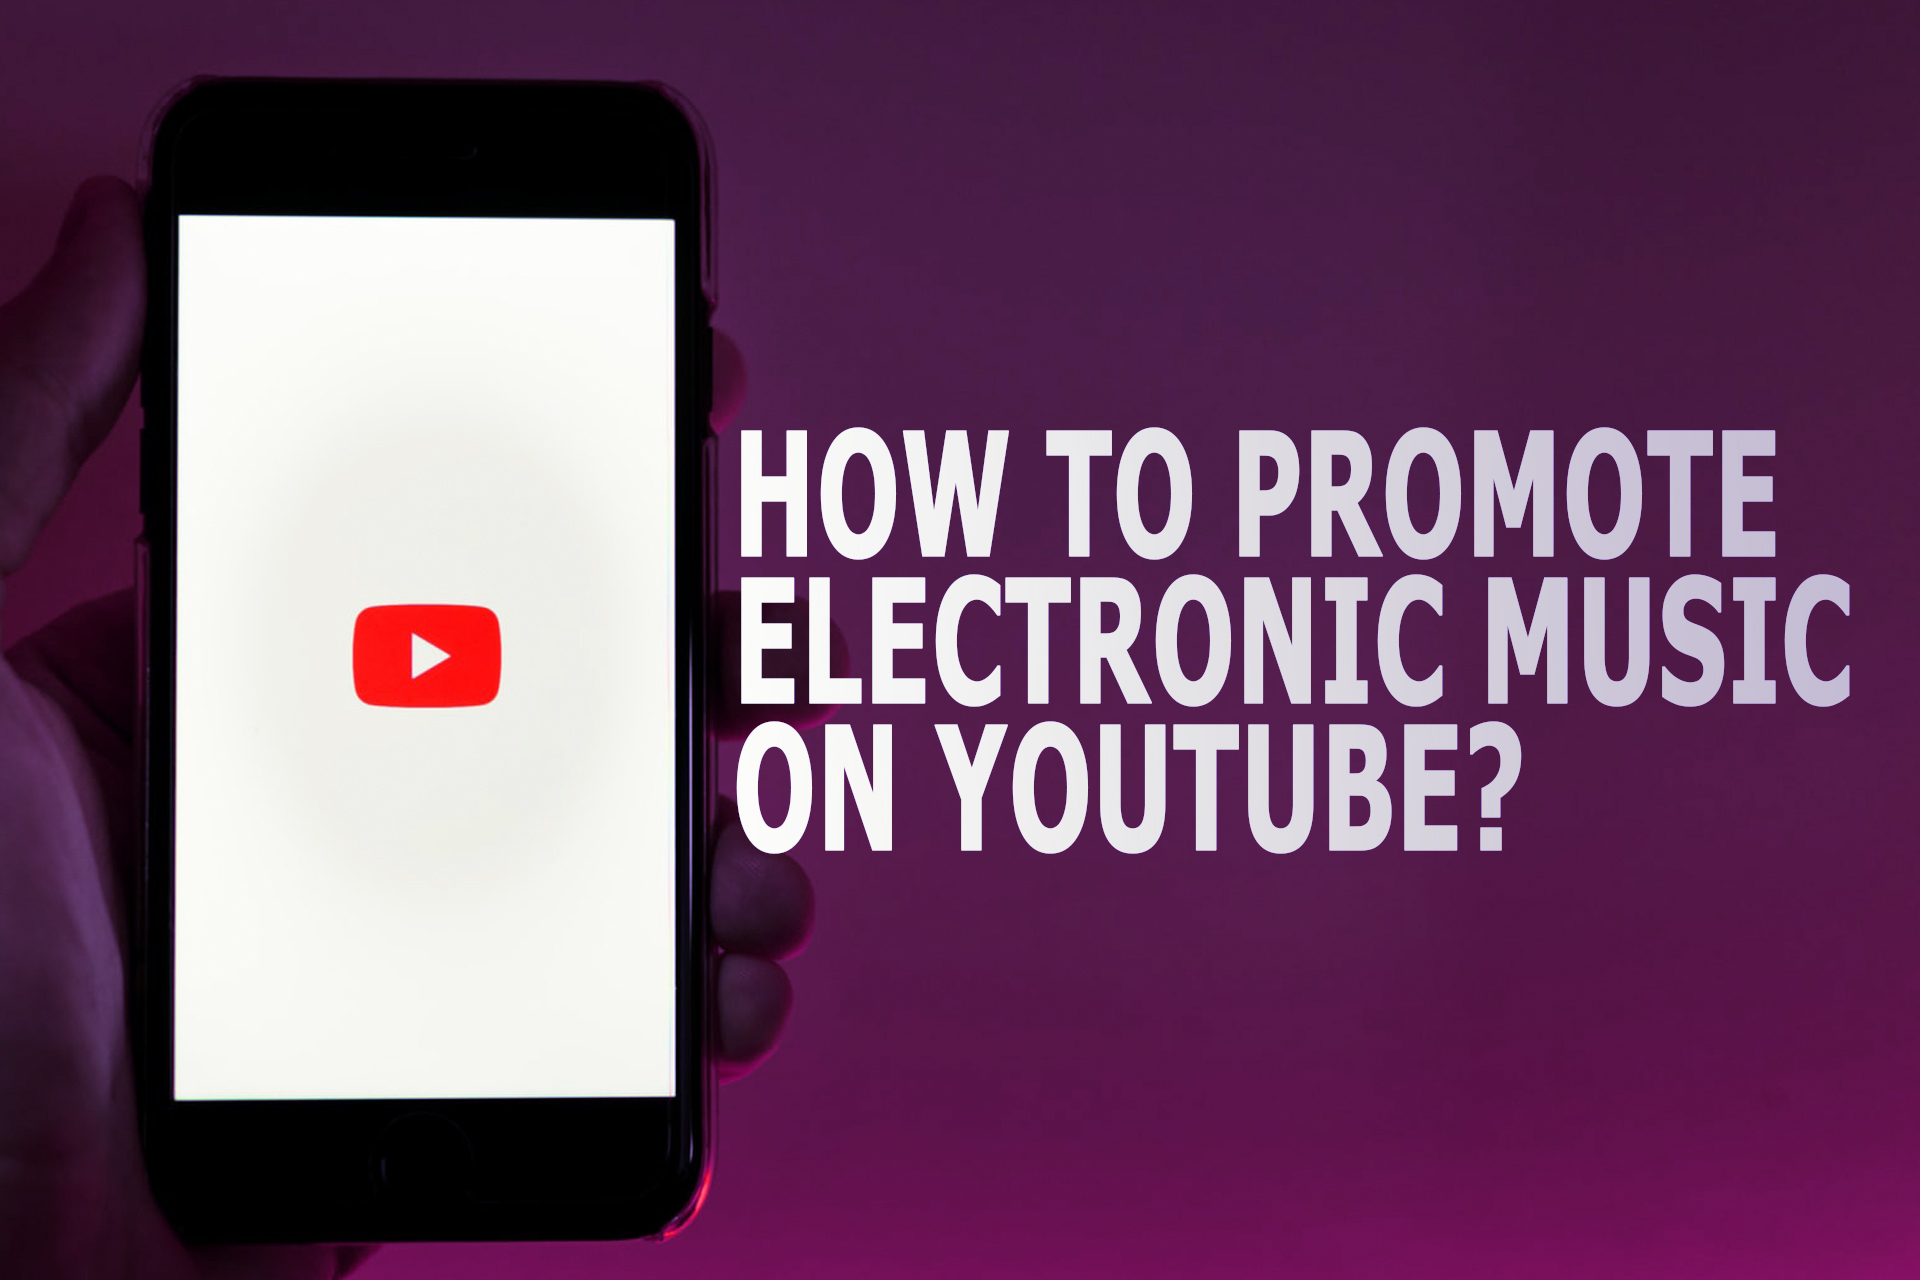 How To Promote Electronic Music on YouTube?